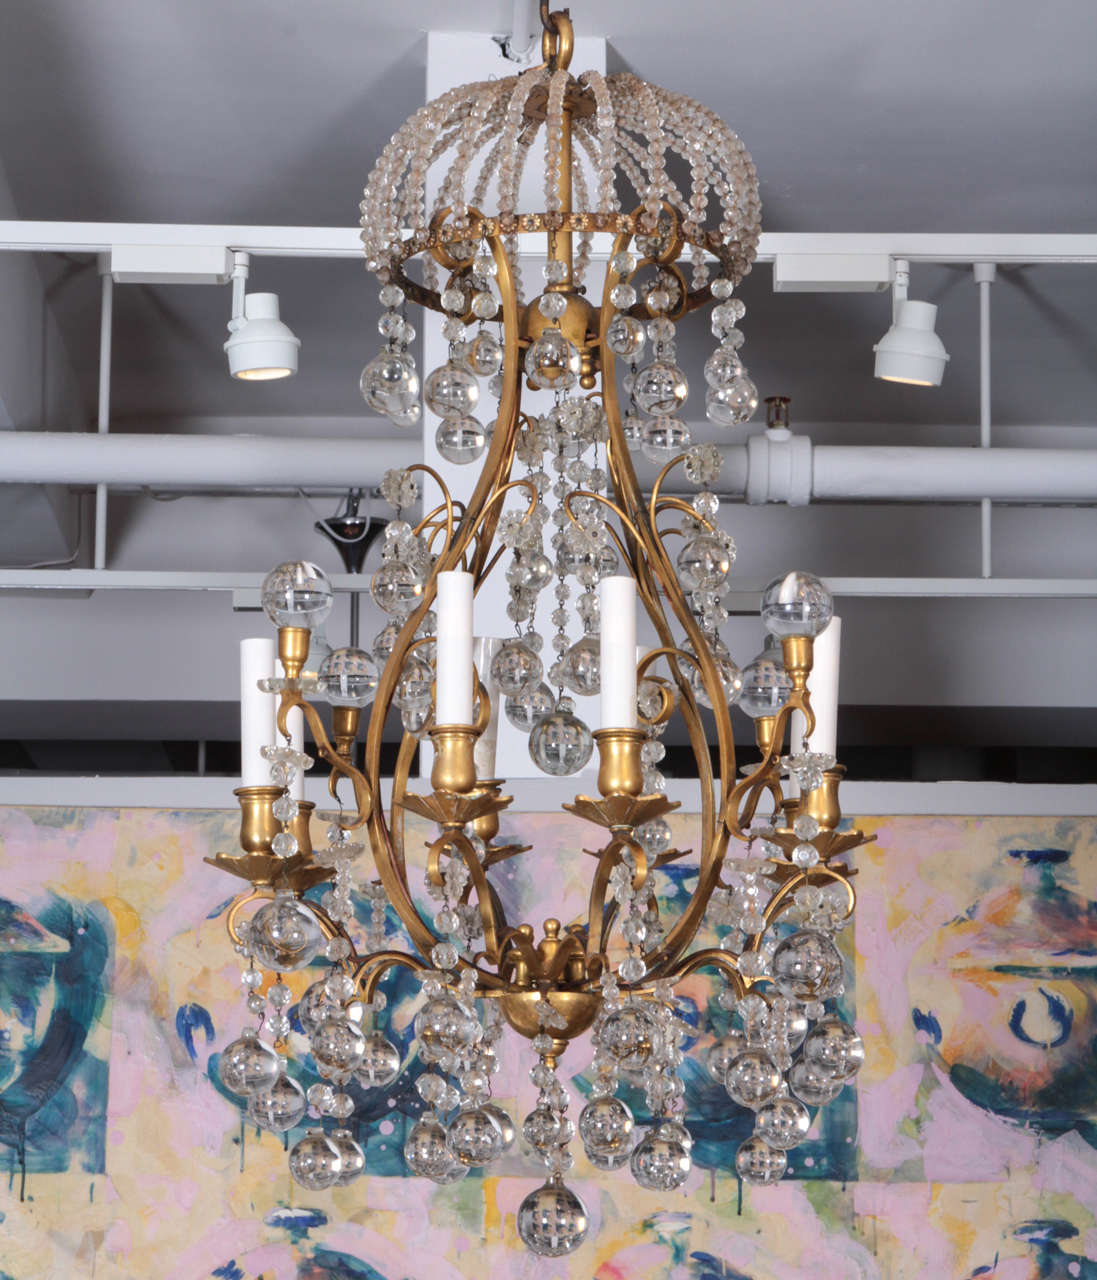 Fine quality bronze and crystal chandelier with 'bubble' crystals with a beaded crystal crown surrmount.
A rare example of 1940's high end French lighting.